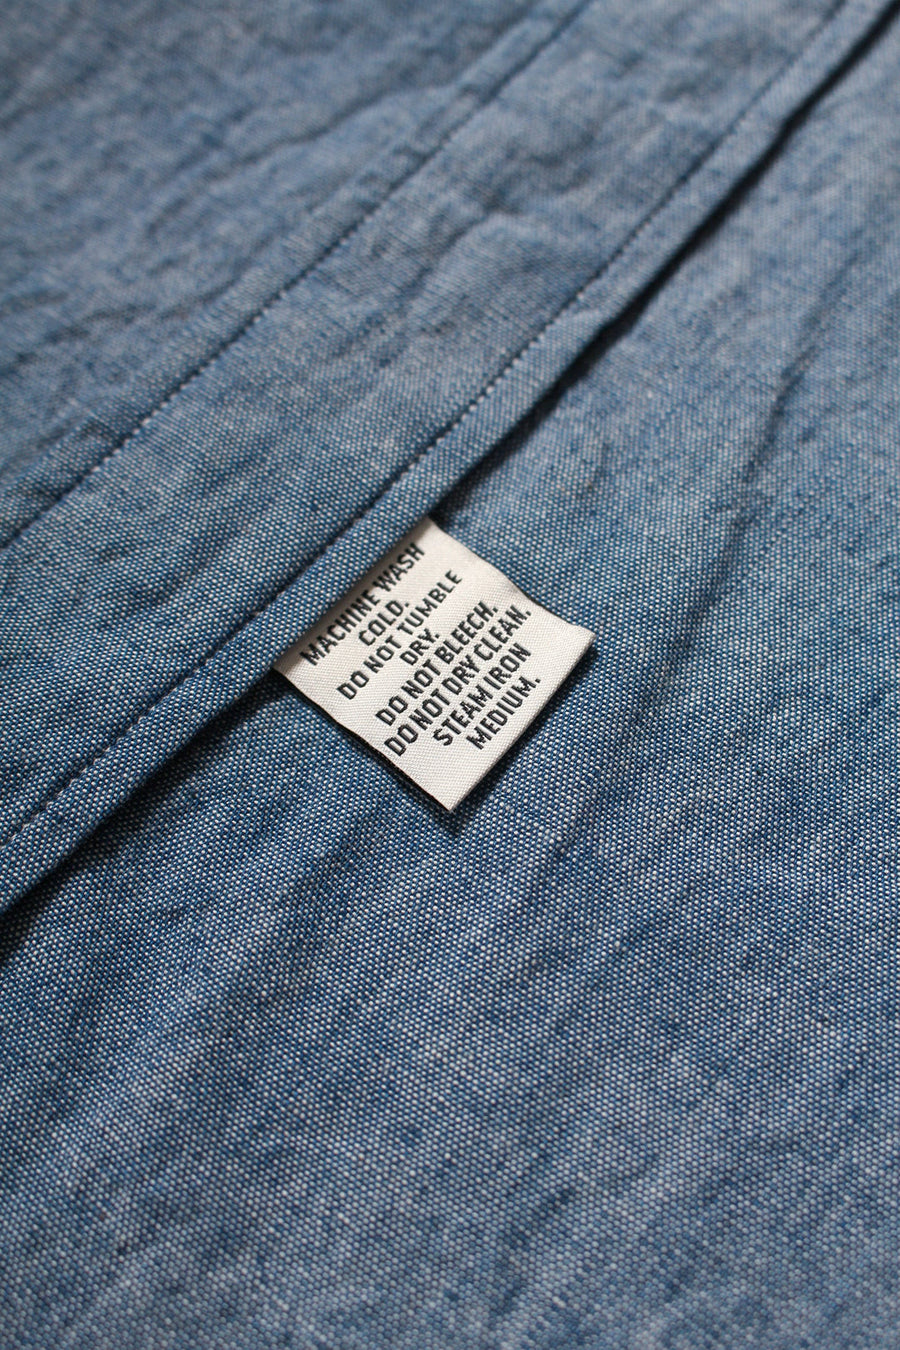 〈RECOGNIZE〉DIGGIN' ICE 96 CHAMBRAY SHIRTS